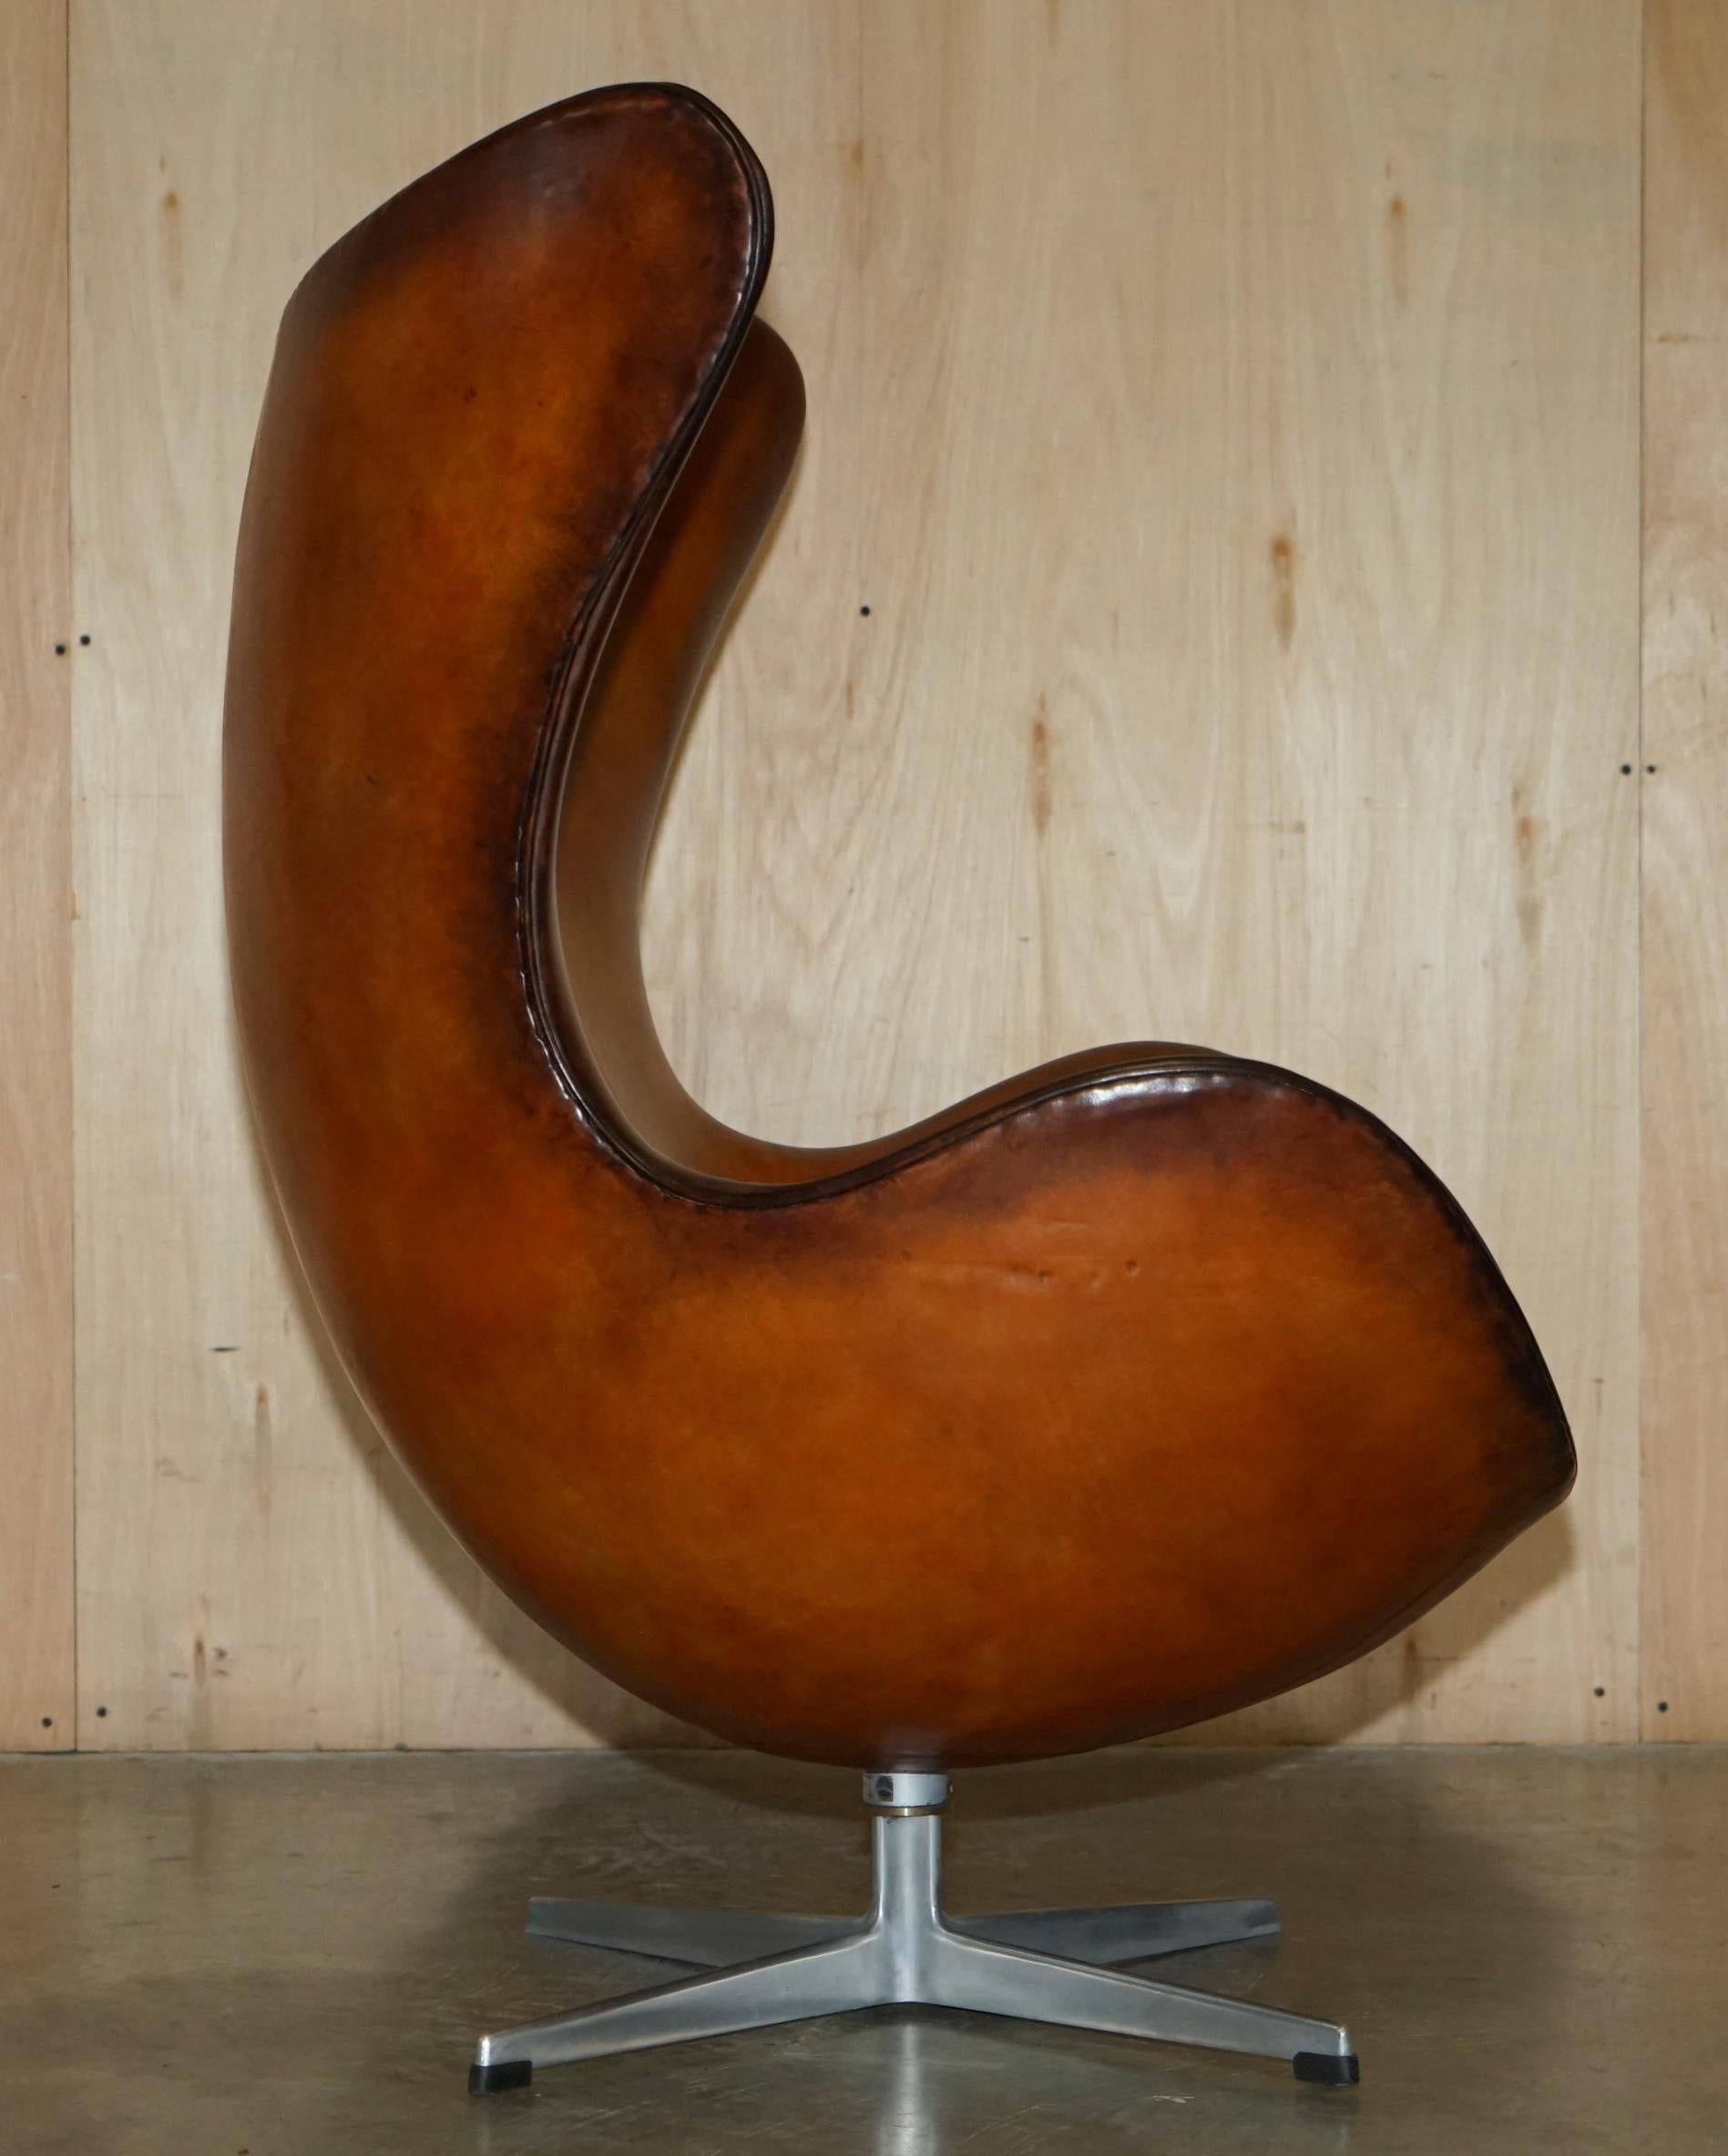 ORIGINAL FULLY RESTORED 1968 FRITZ HANSEN EGG CHAiR & FOOTSTOOL IN BROWN LEATHER For Sale 1